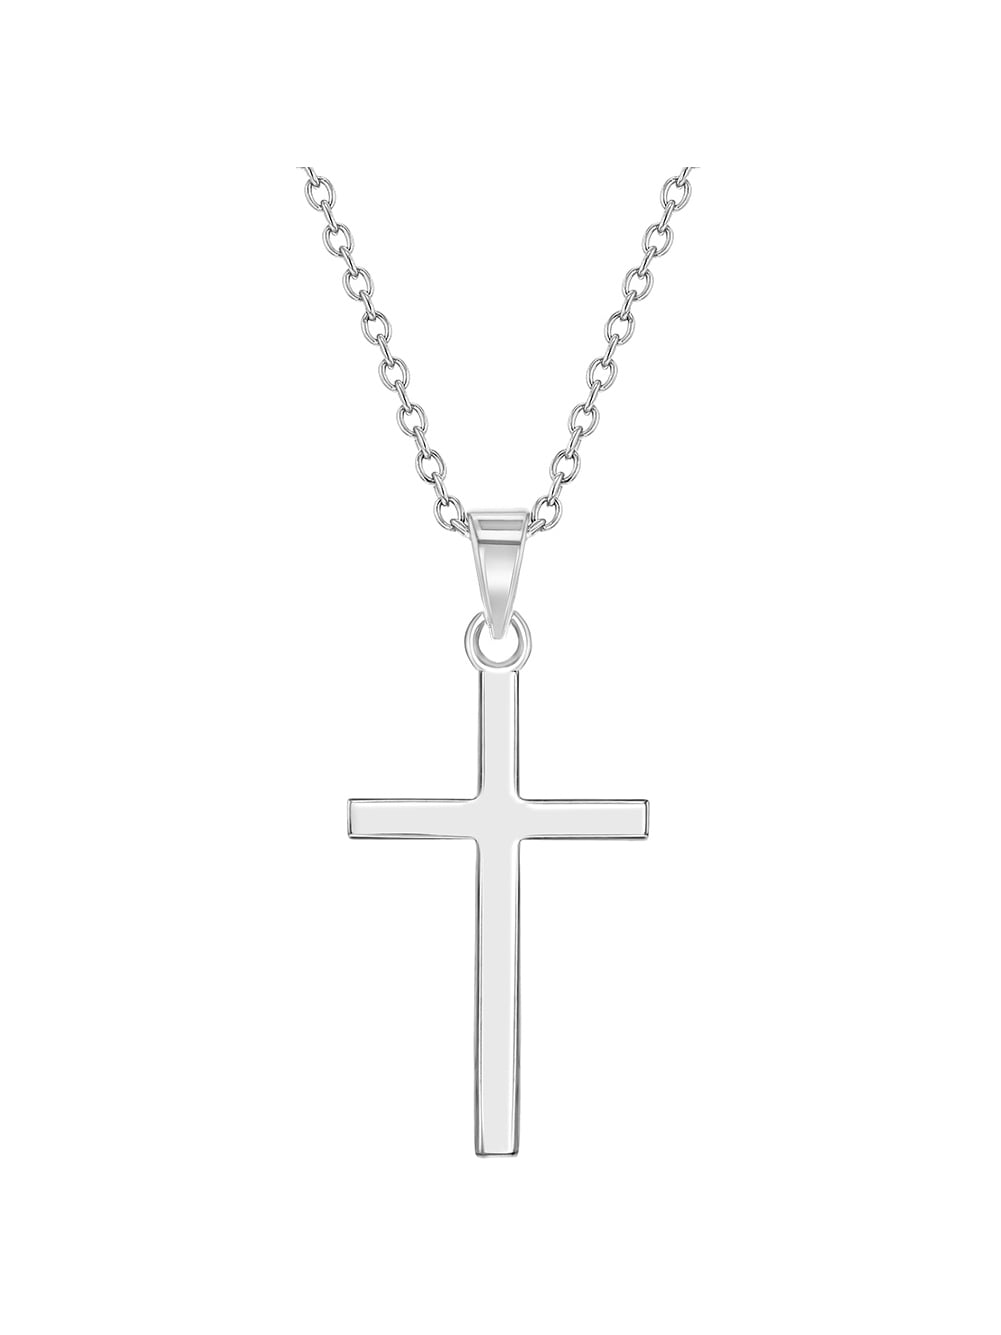 925 Sterling Silver Religious Crucifix Charm Pendant 